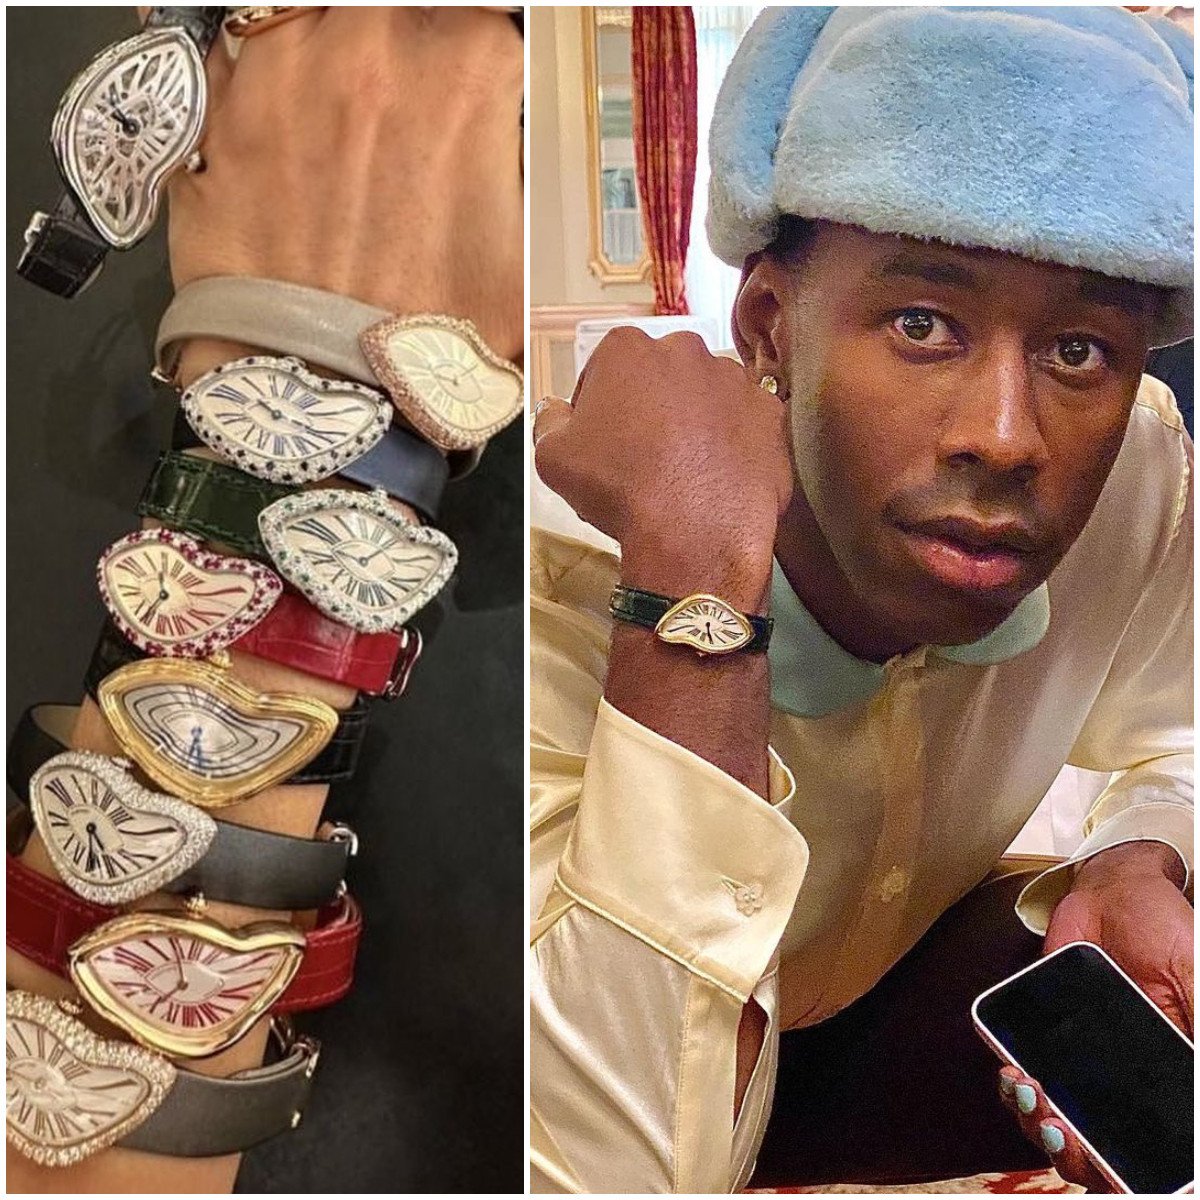 The Cartier Crash watch has been spotted on the wrist of celebrities like Tyler, the Creator. Photos: @tanisova/Instagram, @goldberger/Instagram